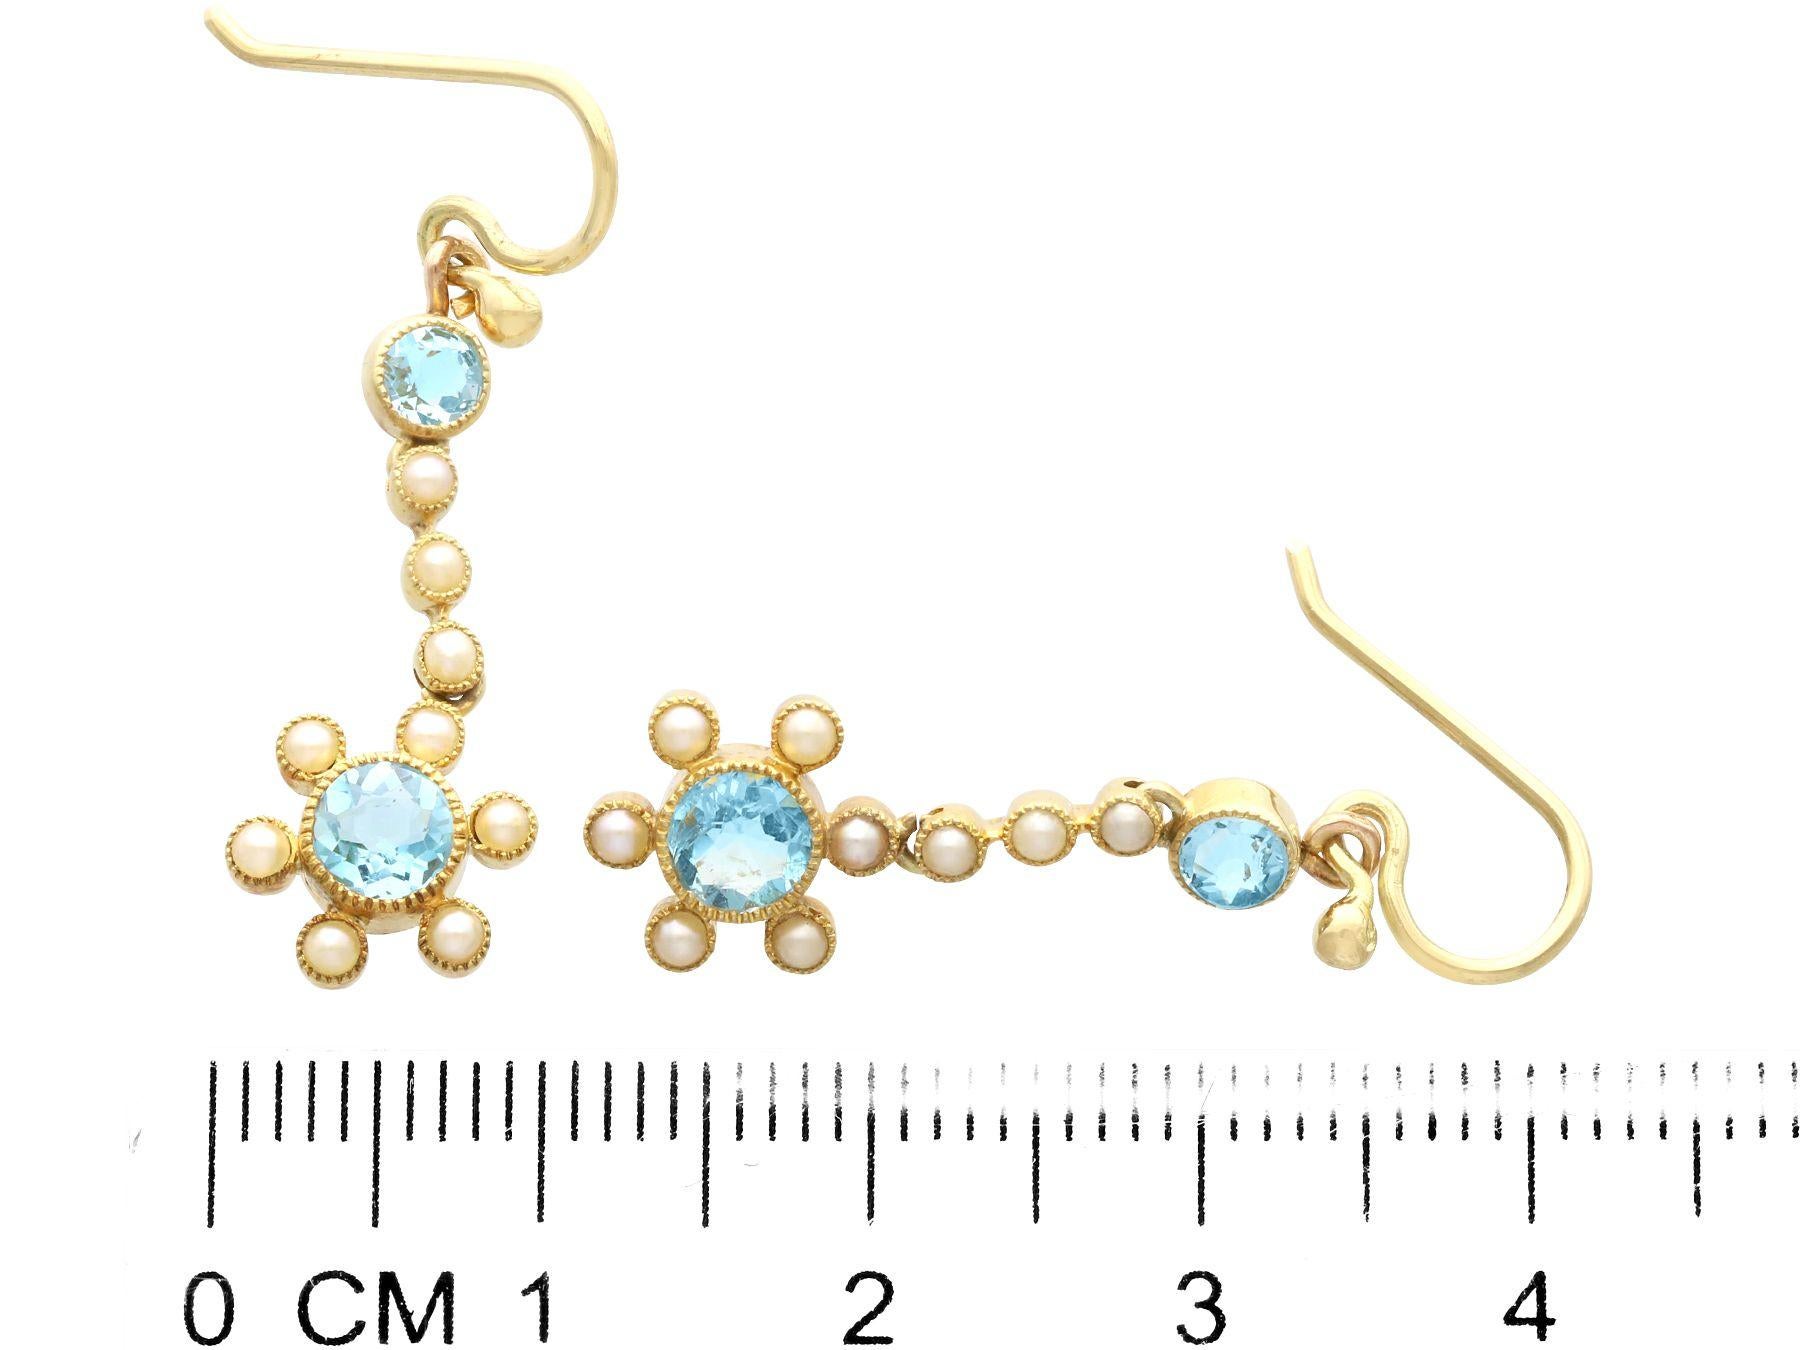 Antique 2.71 Carat Aquamarine and Pearl Yellow Gold Earring and Pendant Set For Sale 6